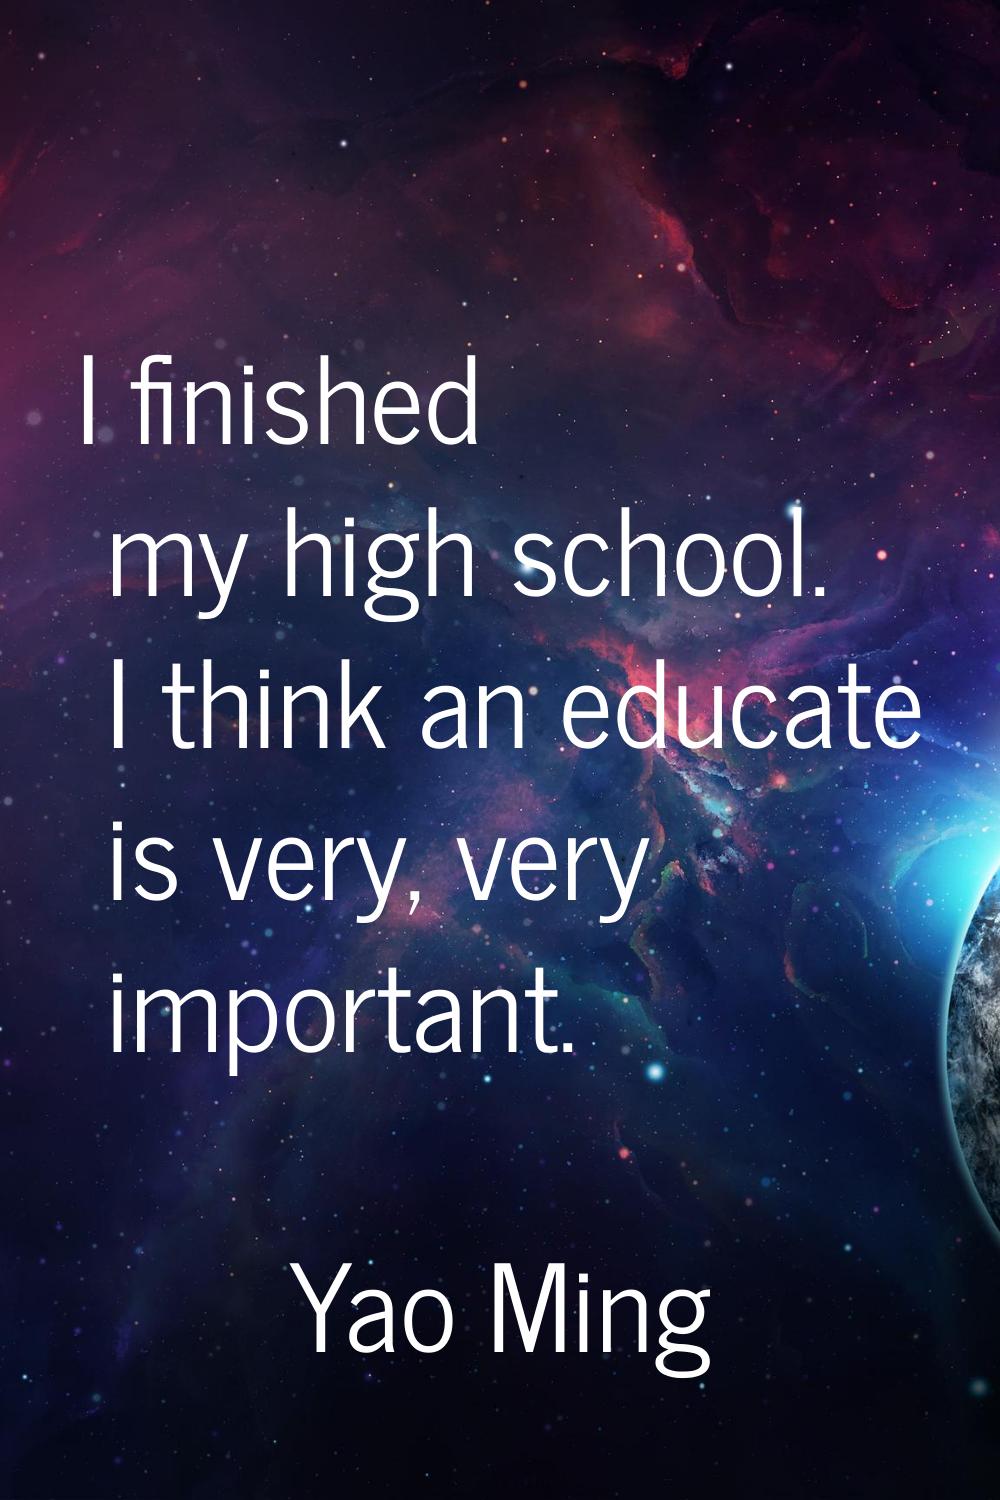 I finished my high school. I think an educate is very, very important.